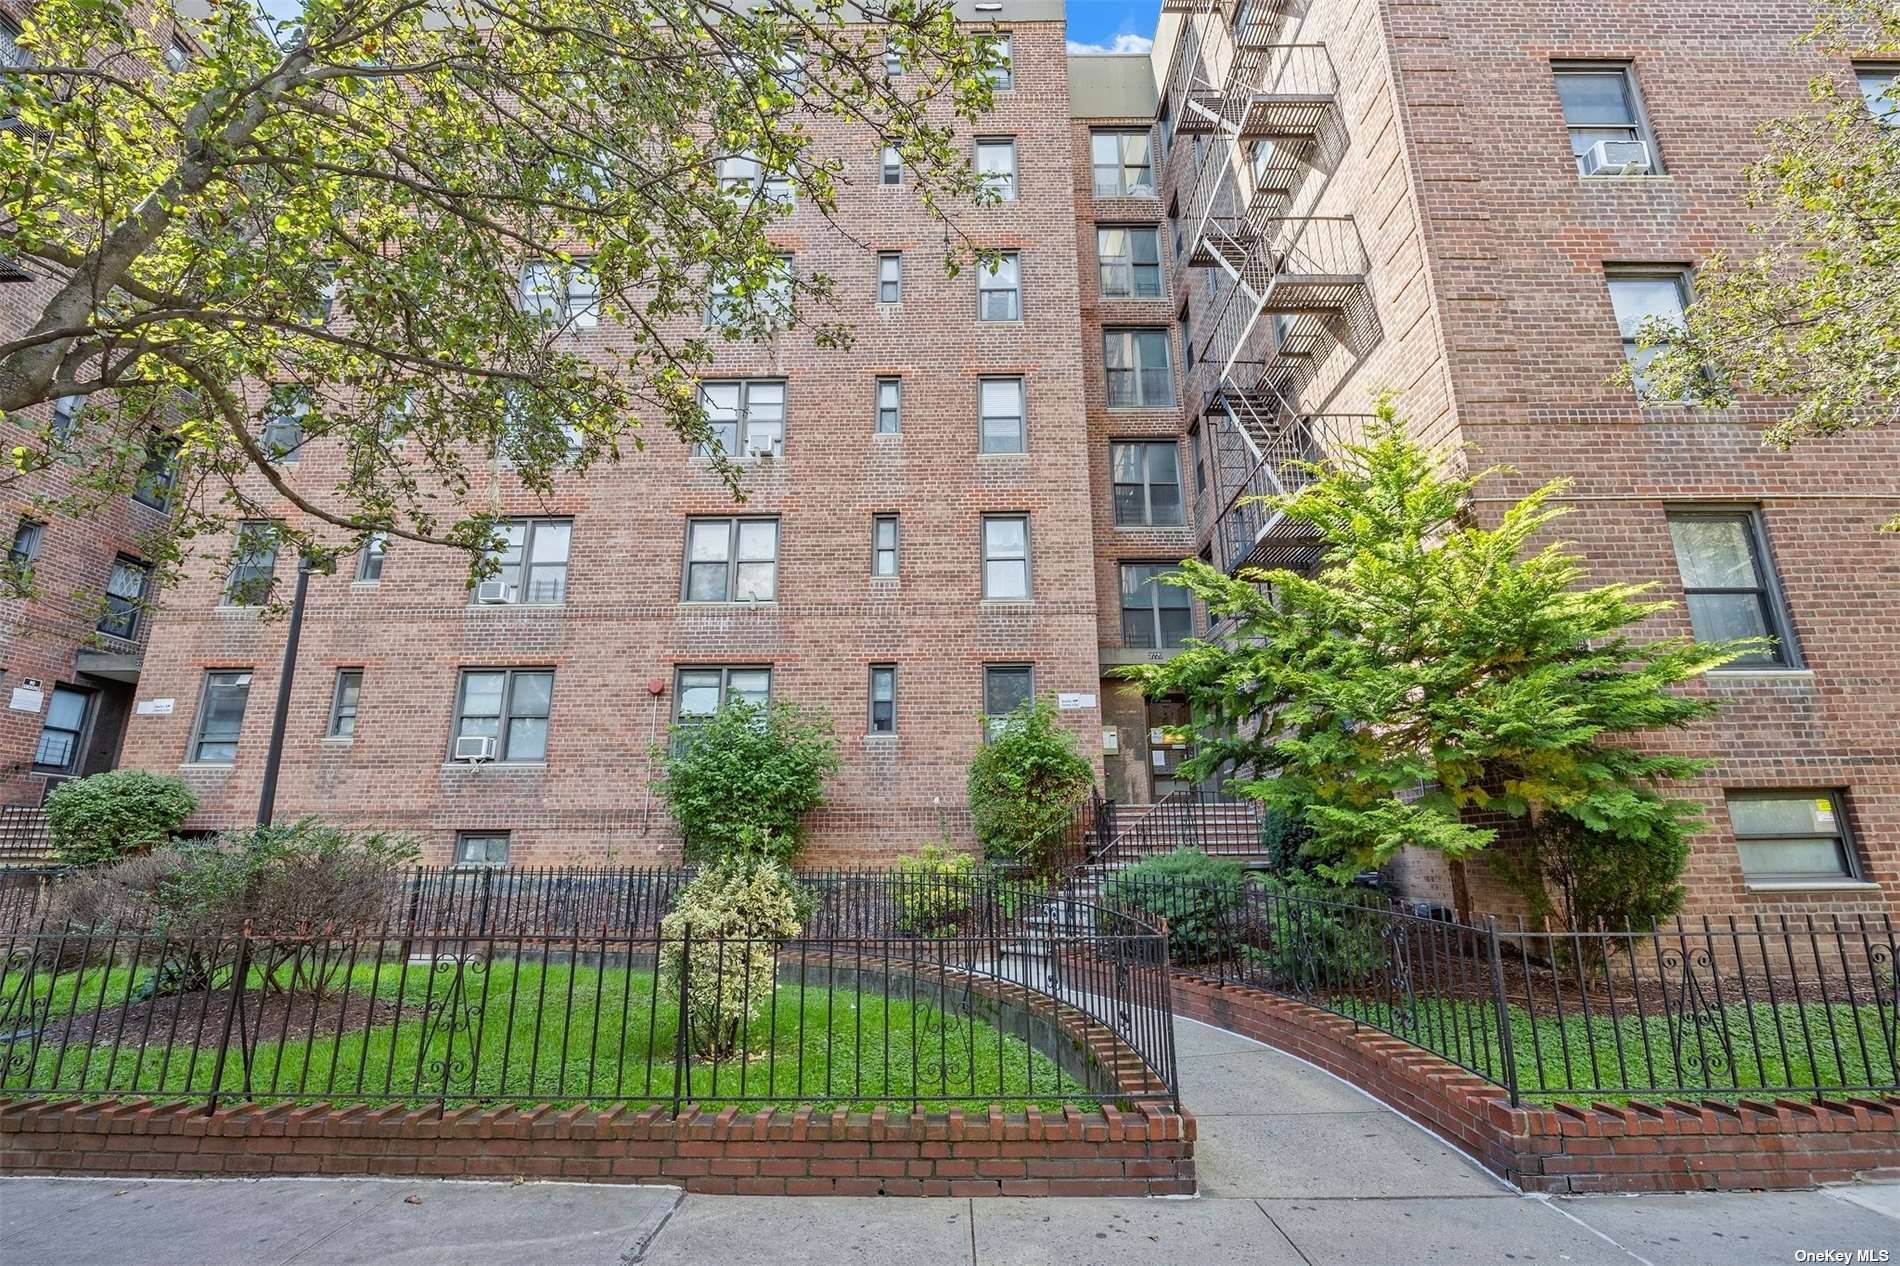 Introducing an immaculate 1 bedroom coop nestled in the heart of Historic Jackson Heights.